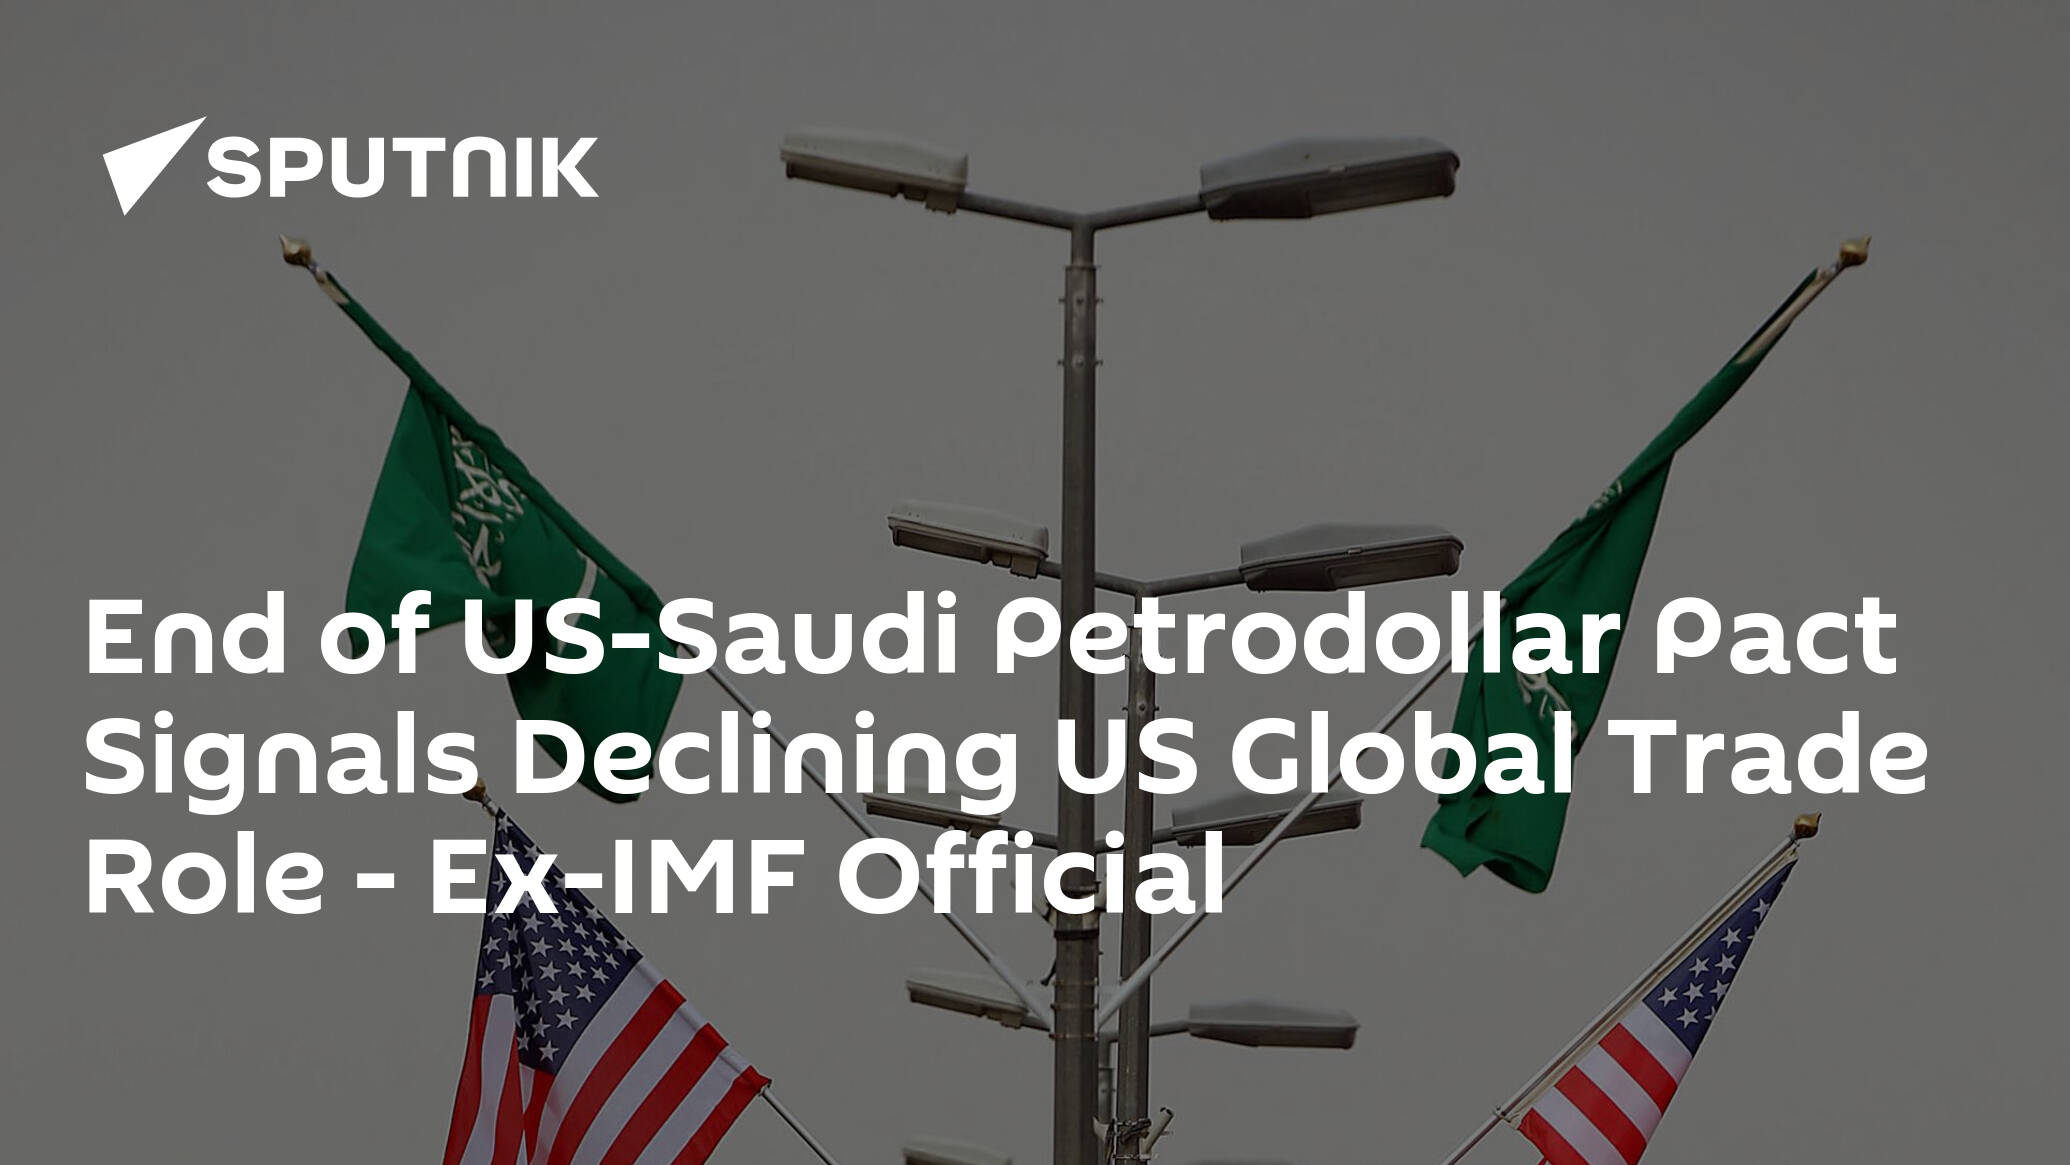 End of US-Saudi Petrodollar Pact Signals Declining US Global Trade Role – Ex-IMF Official